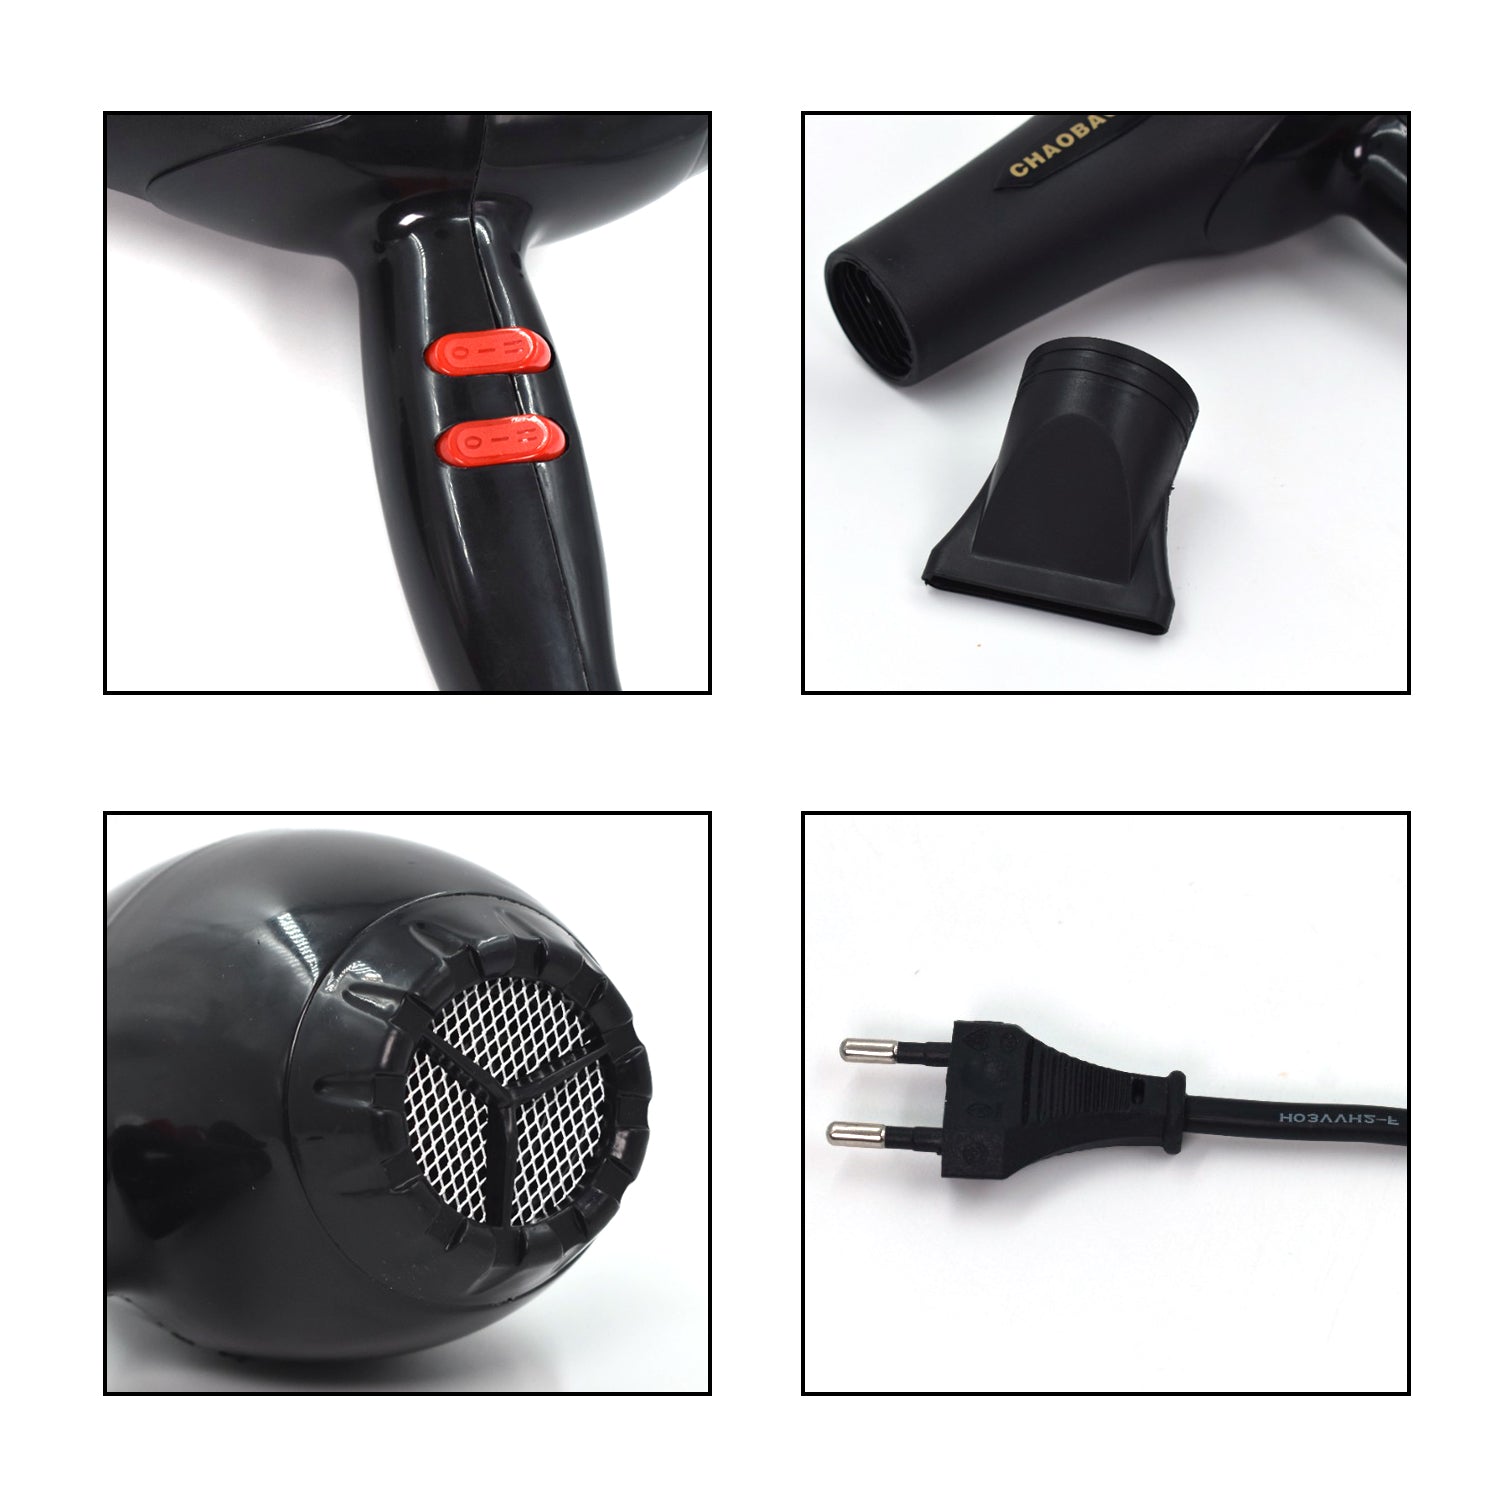 1337A Professional Stylish Hair Dryers For Women And Men DeoDap